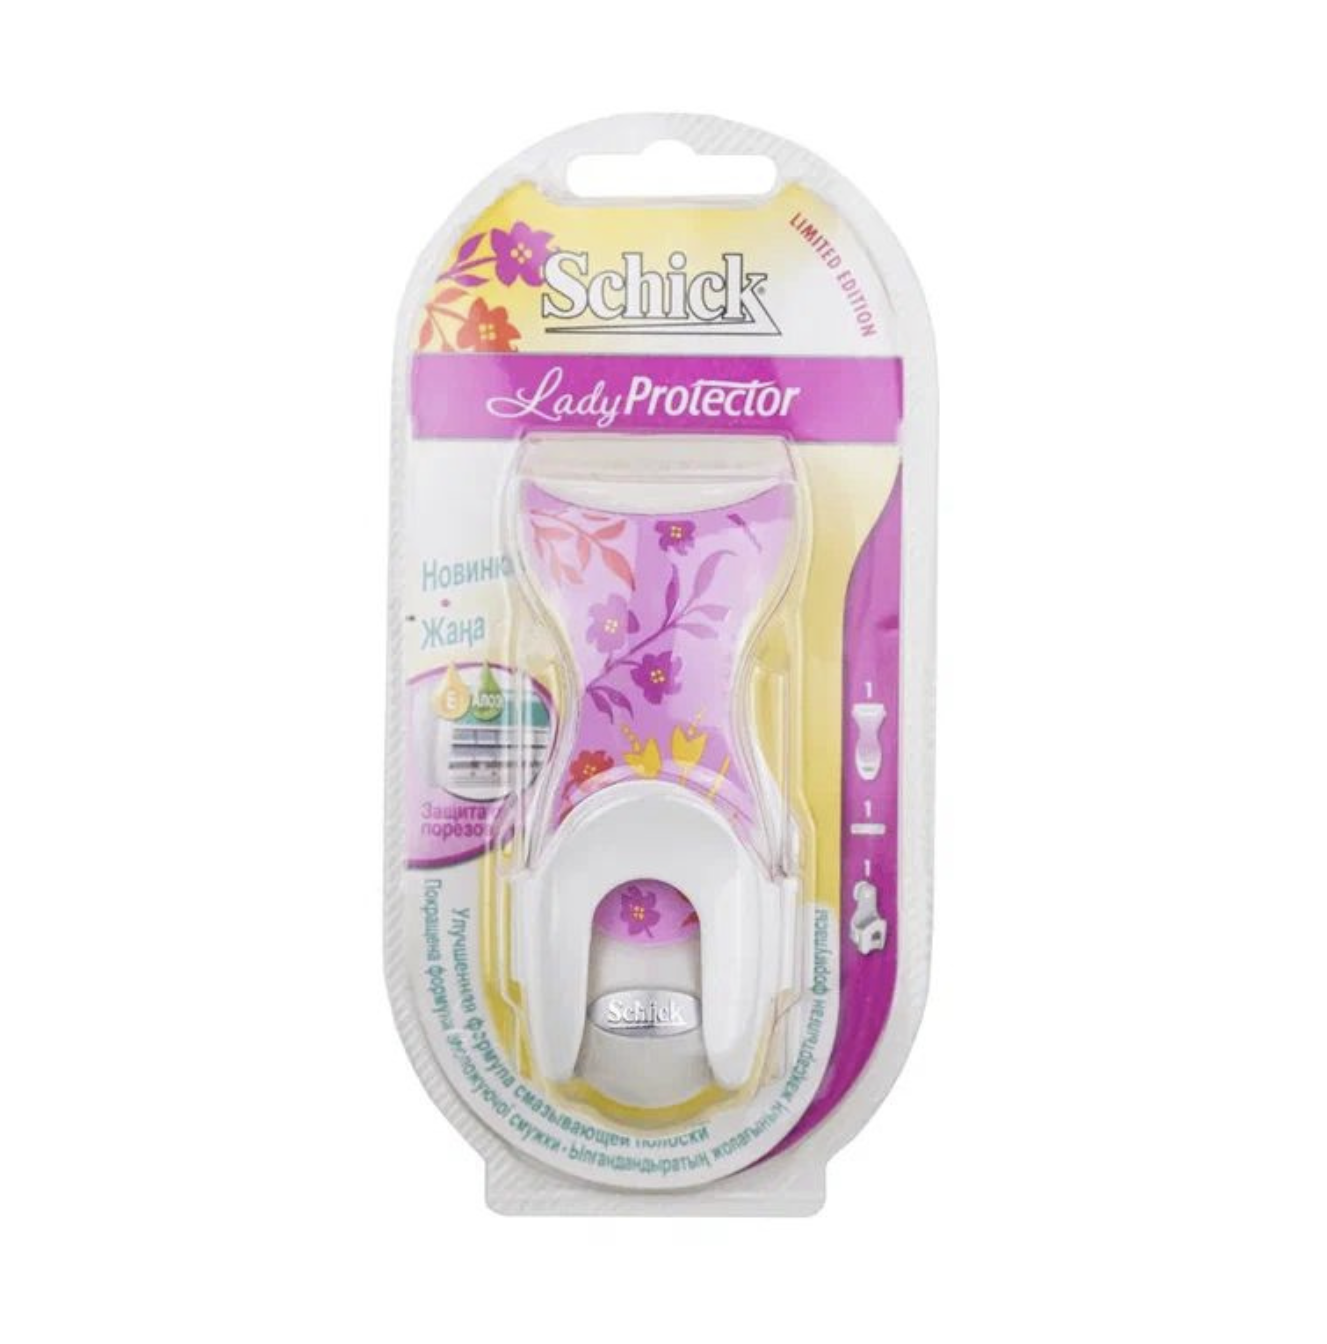     / Schick Lady Protector -      1  